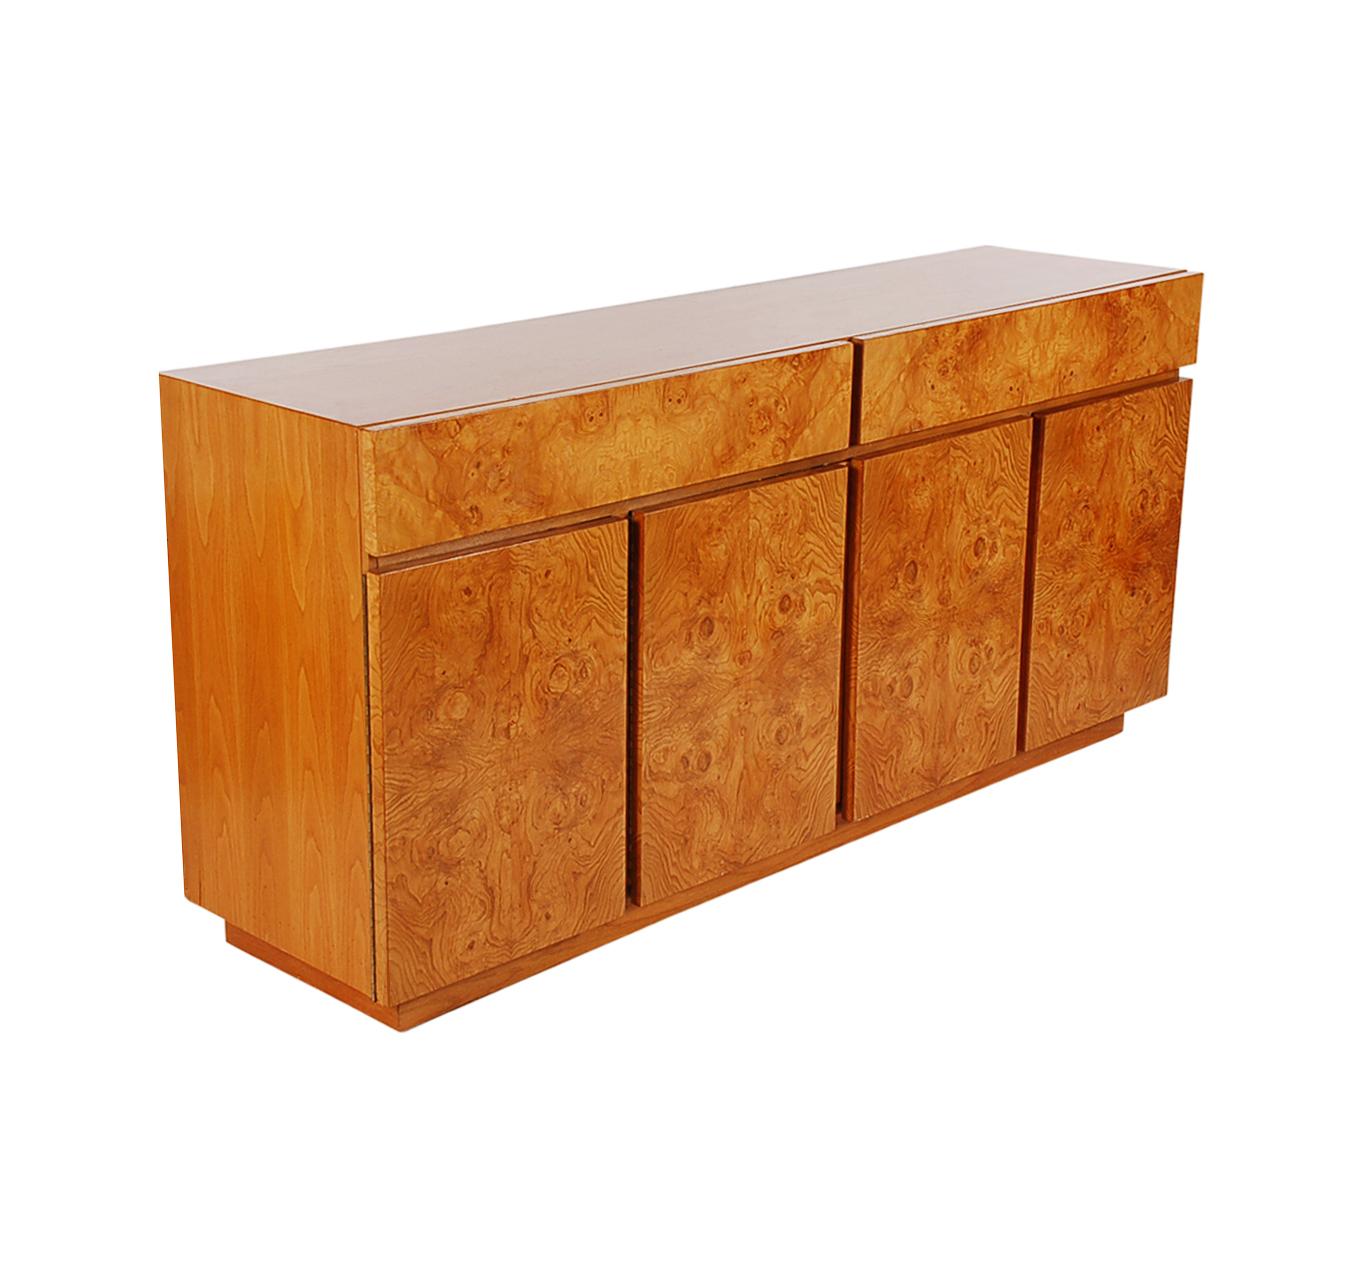 A beautiful 4-door credenza by Roland Carter for Lane Furniture. This piece features solid wood construction with bookmatched burl maple veneers.